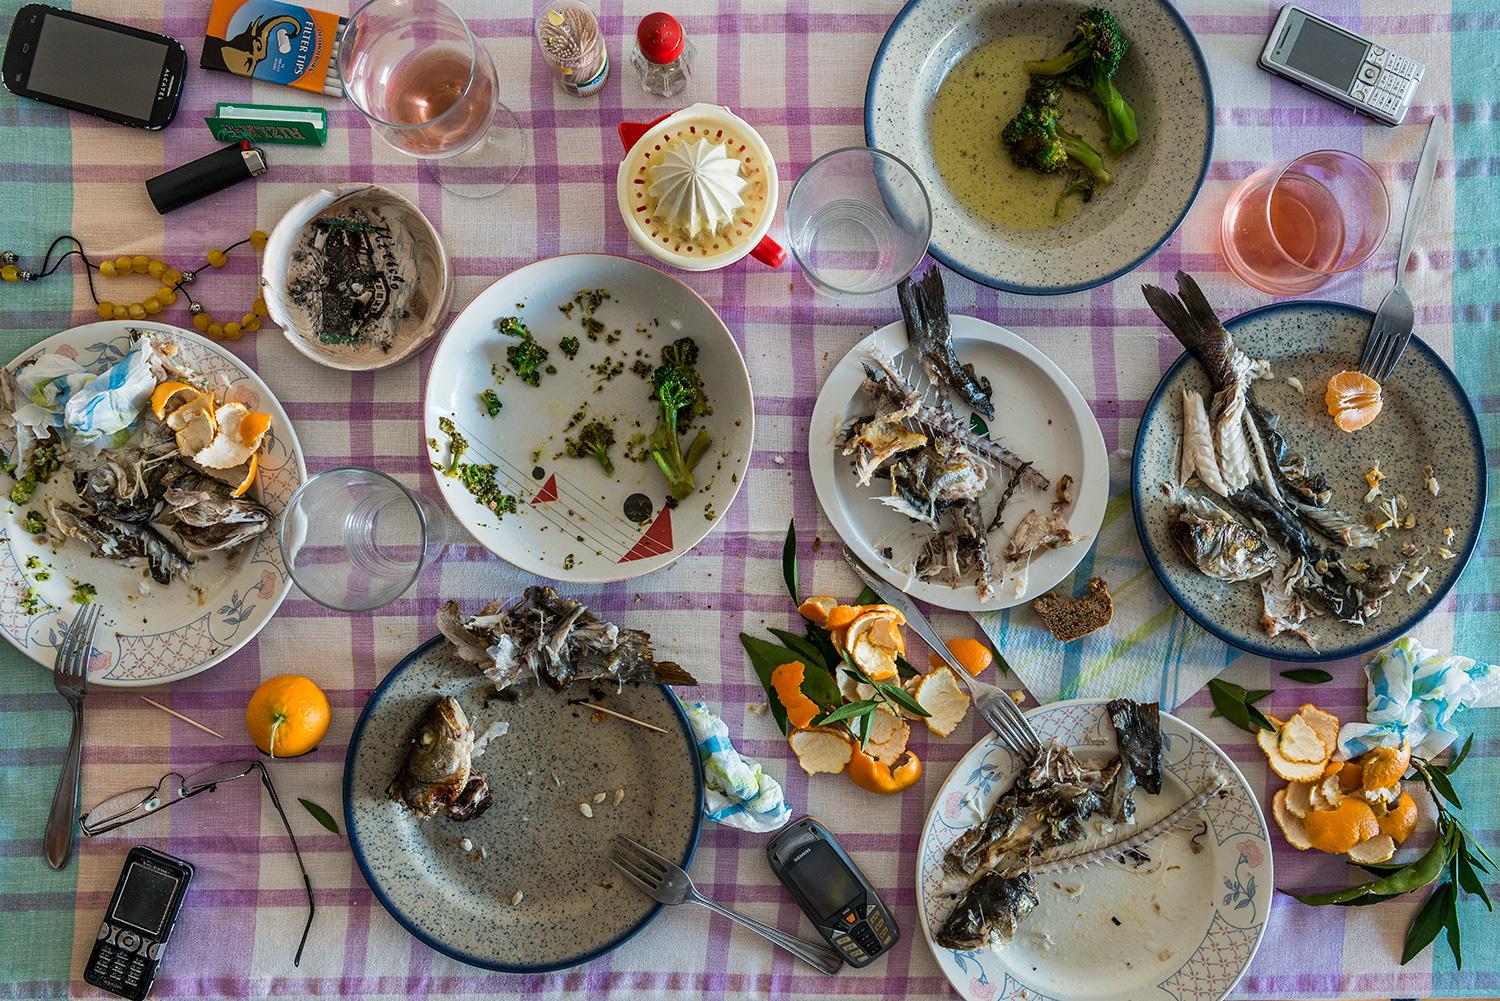 This photograph belongs to the series "Conversations." Evoking Dutch still-life as inspiration, these beautiful, contemporary tabletops contemplate technology's implications upon human interaction and memory. Shared meals with friends and family